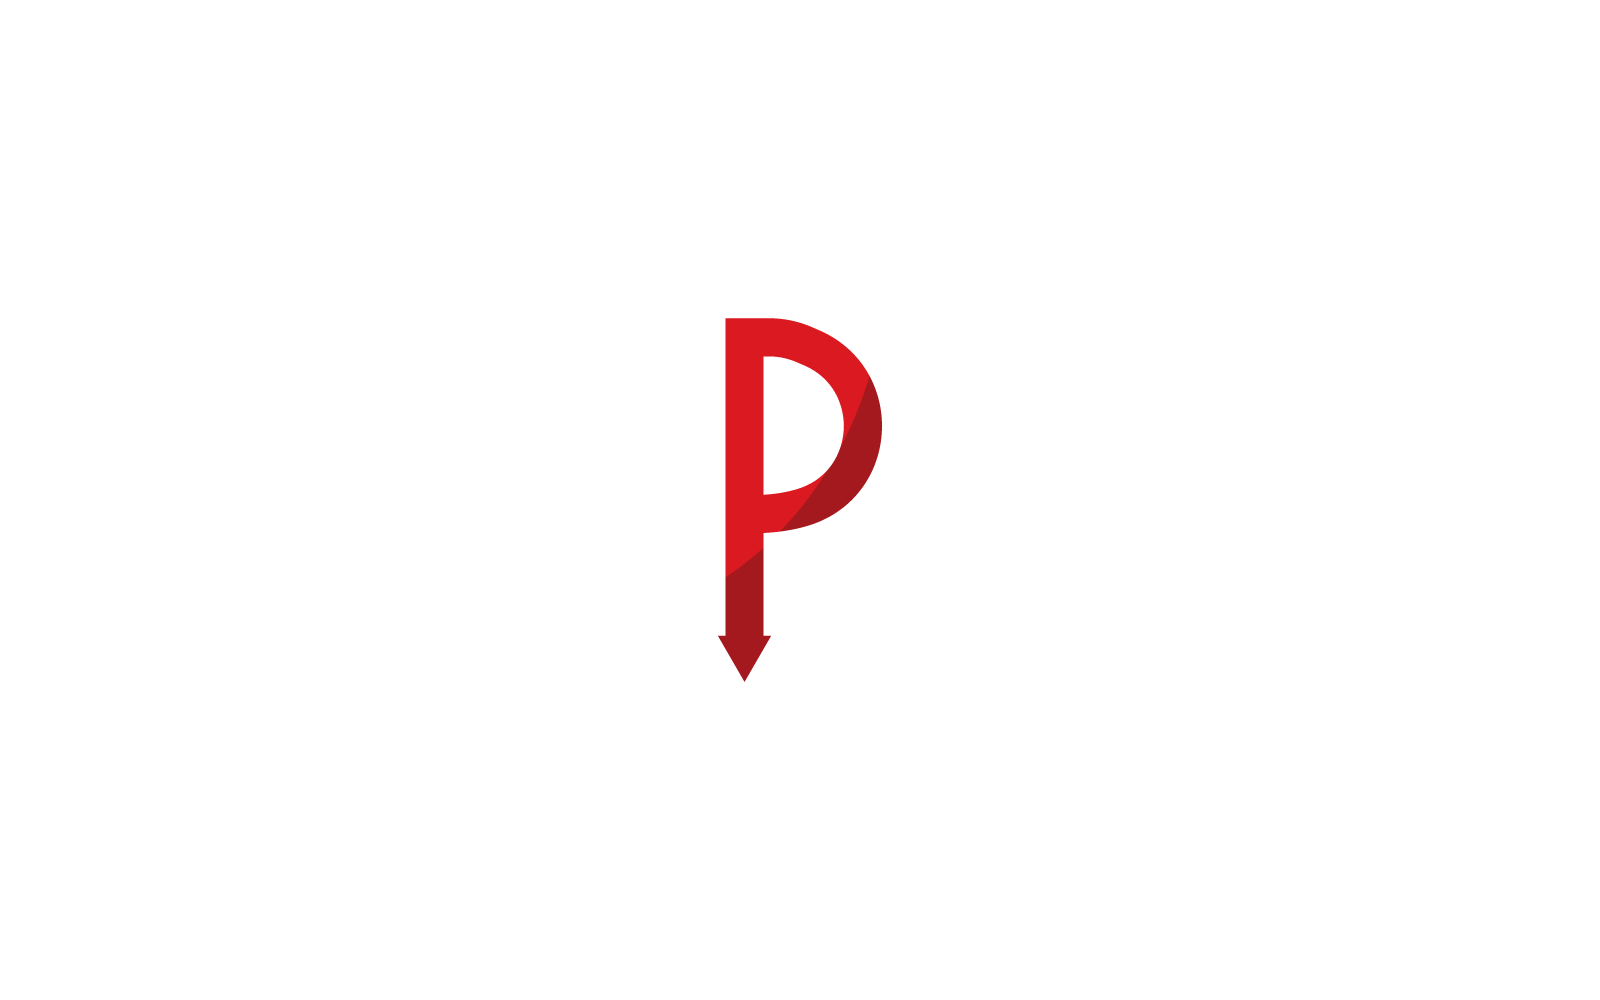 P Initial letter with arrow design illustration